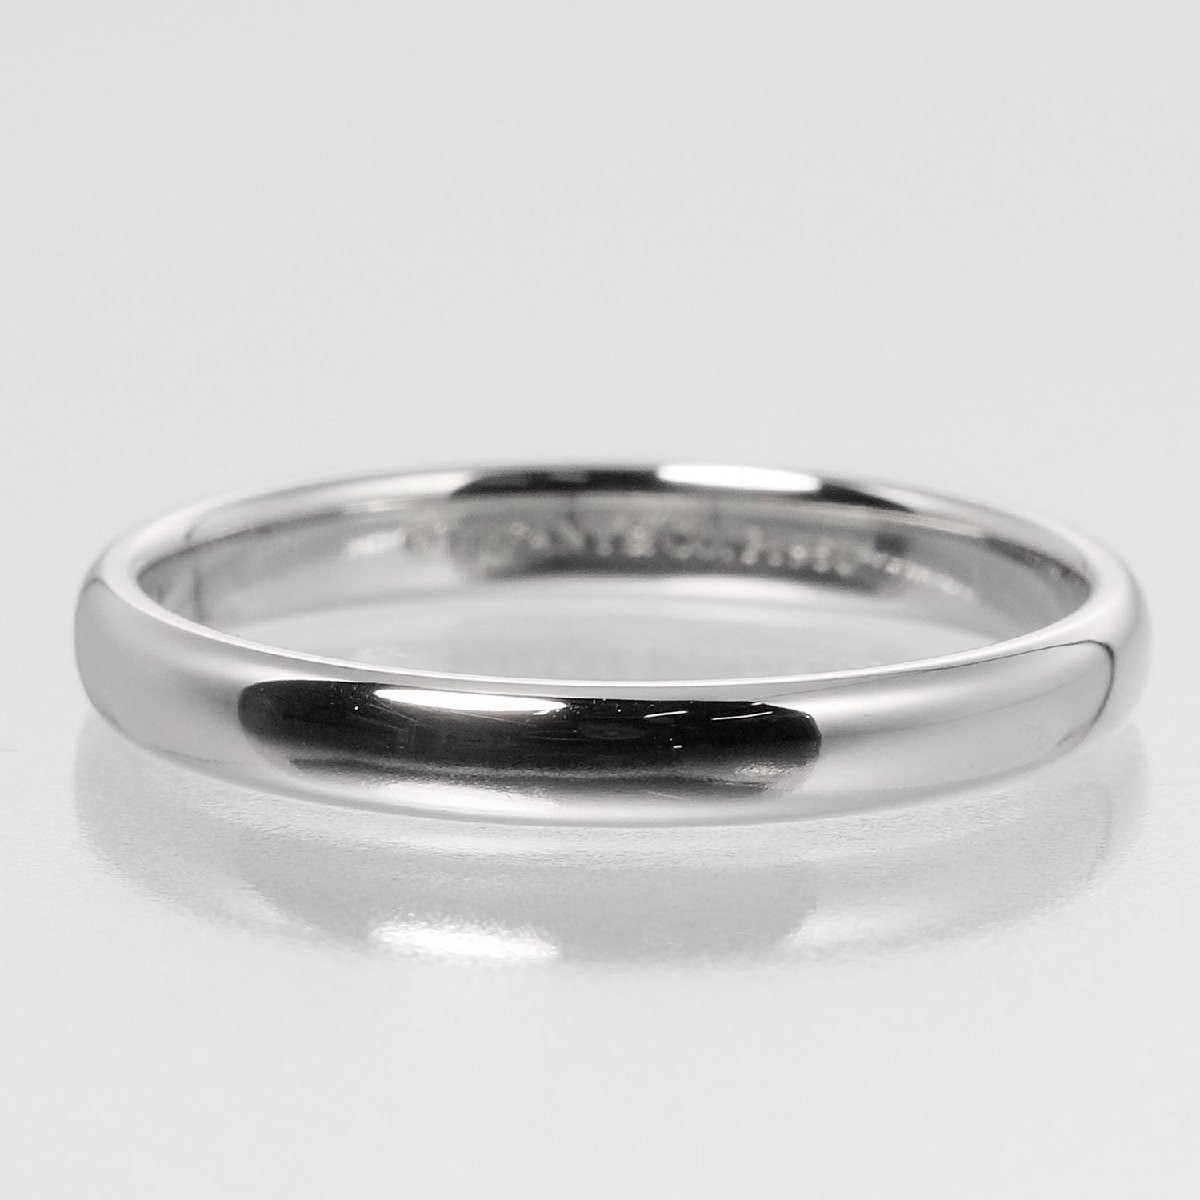  Tiffany four ever wedding ring ring 19.5 number Classic band 3mm model 5.19g Pt950 platinum [I182323011] used 